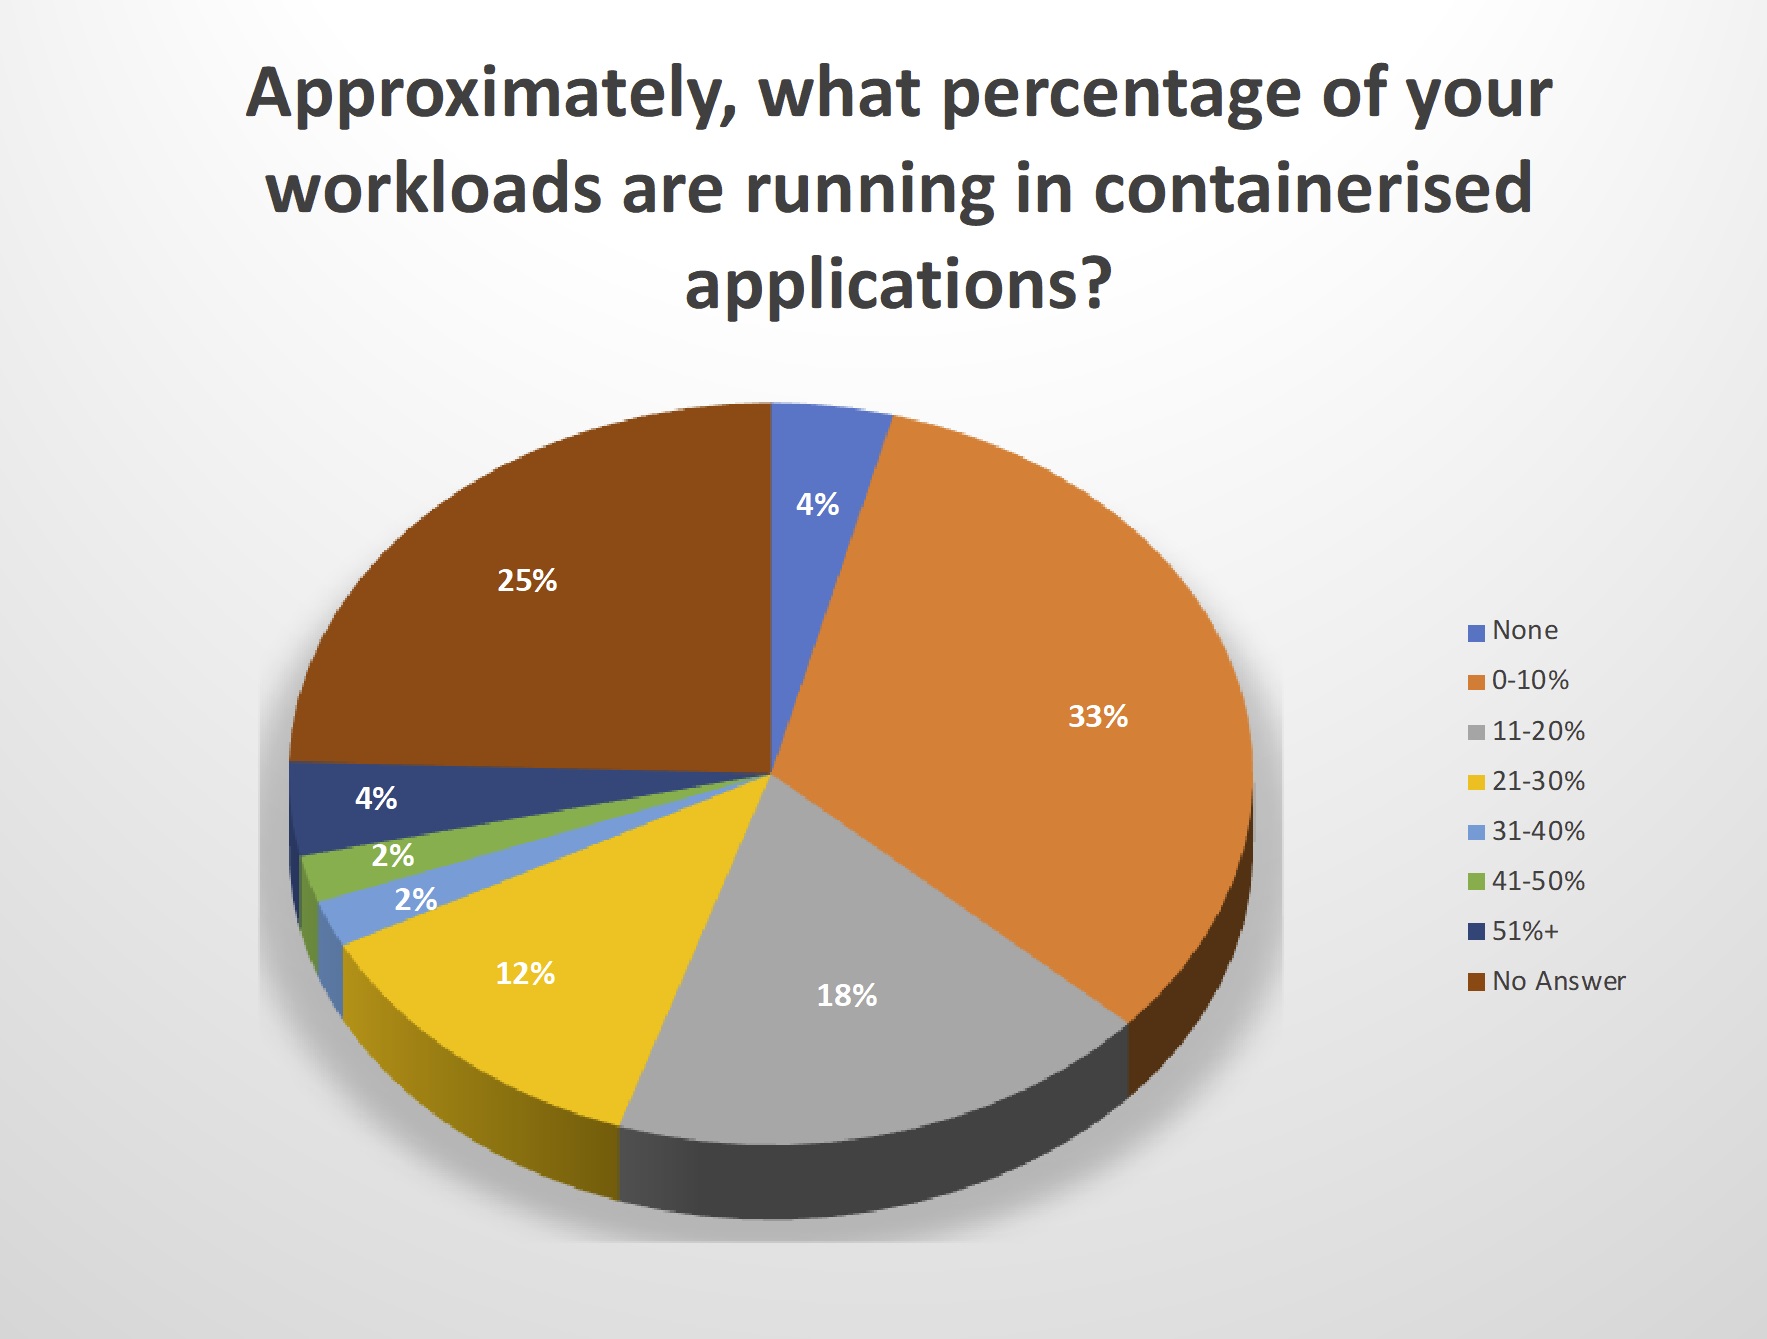 Approximate, percentage of workloads running in containerized applications